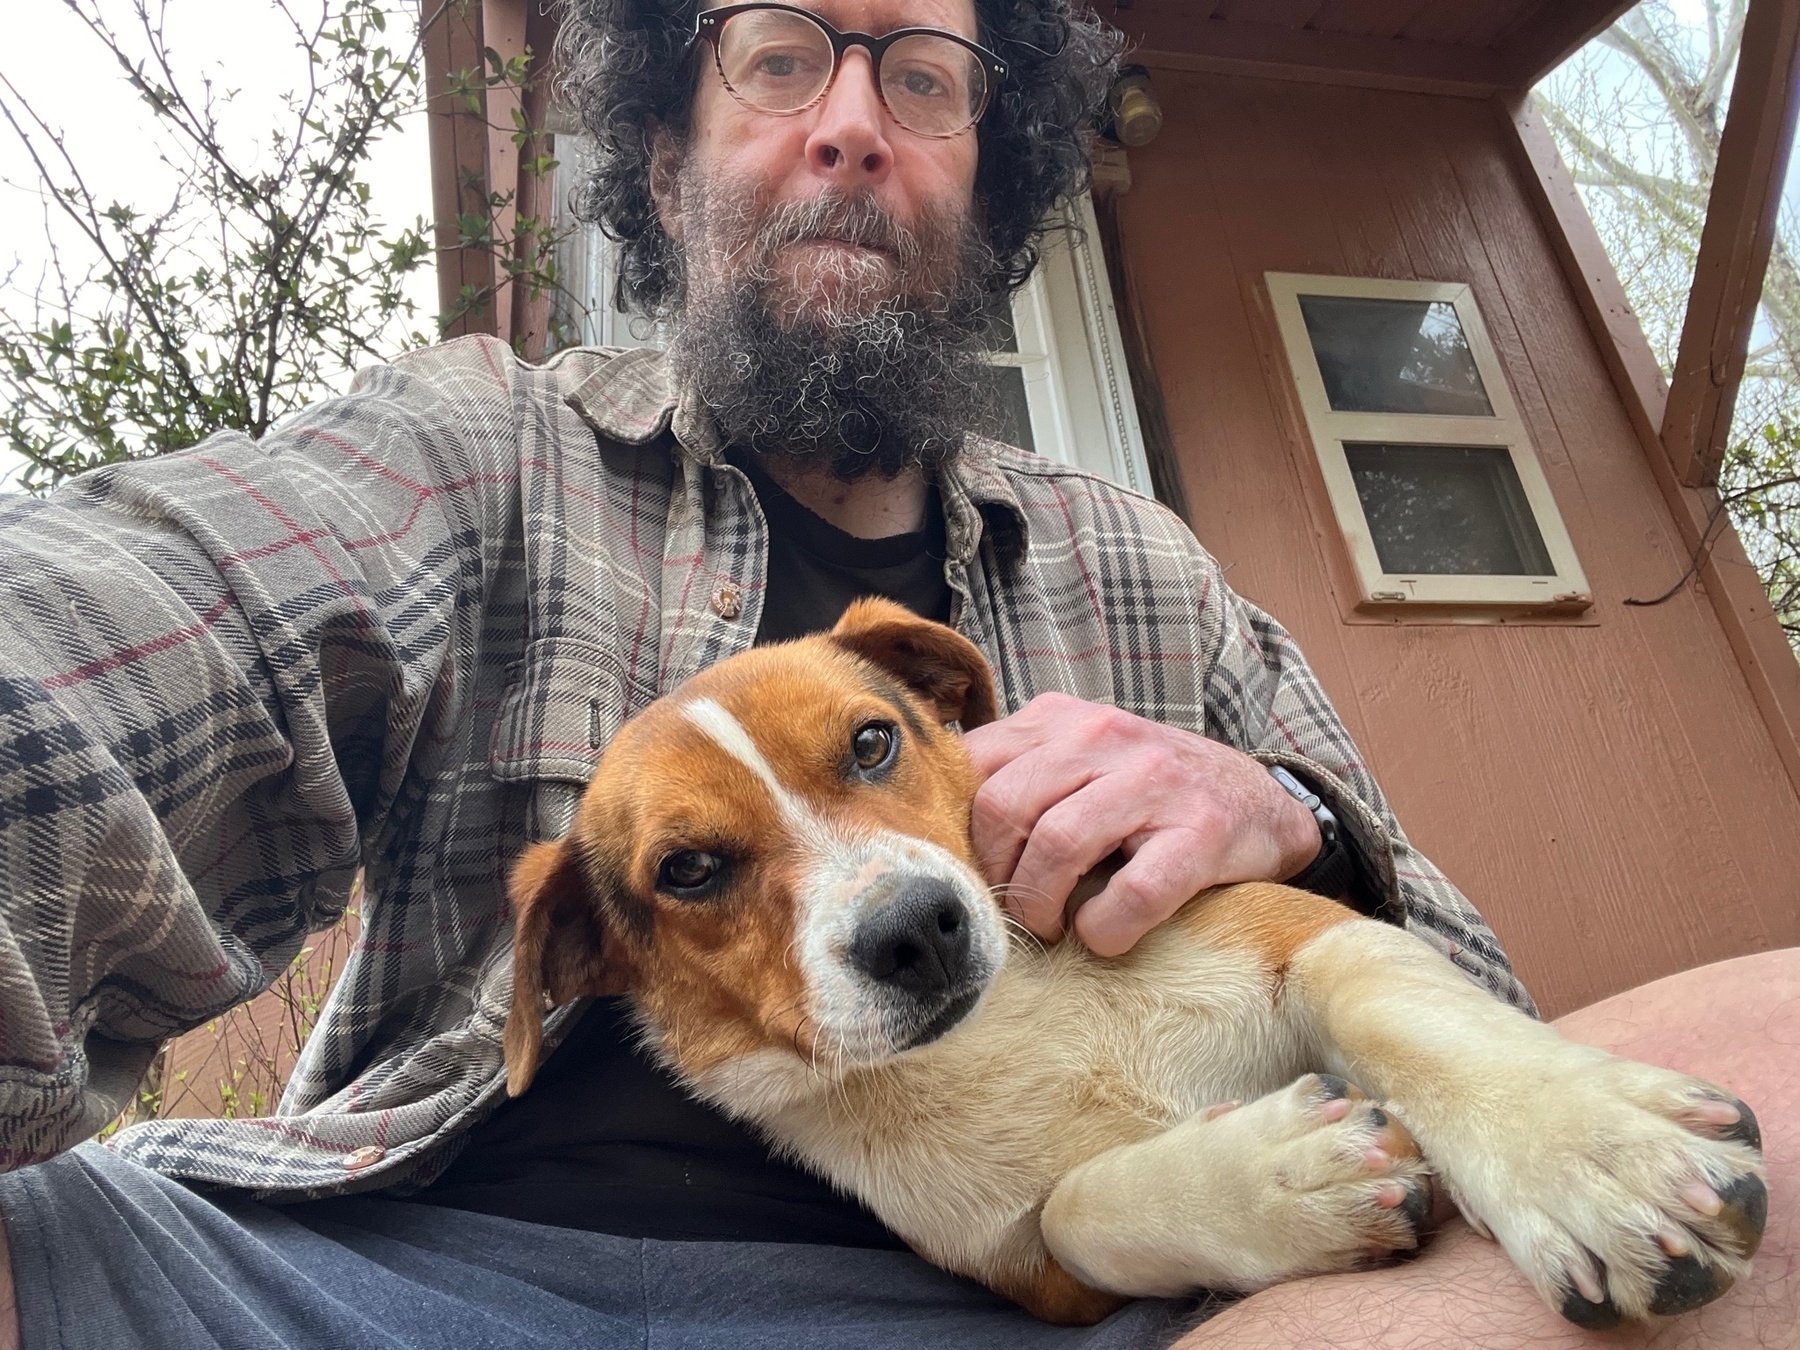 A beagle is laying on the lap of a beardy guy with glasses. Both are looking at the camera.